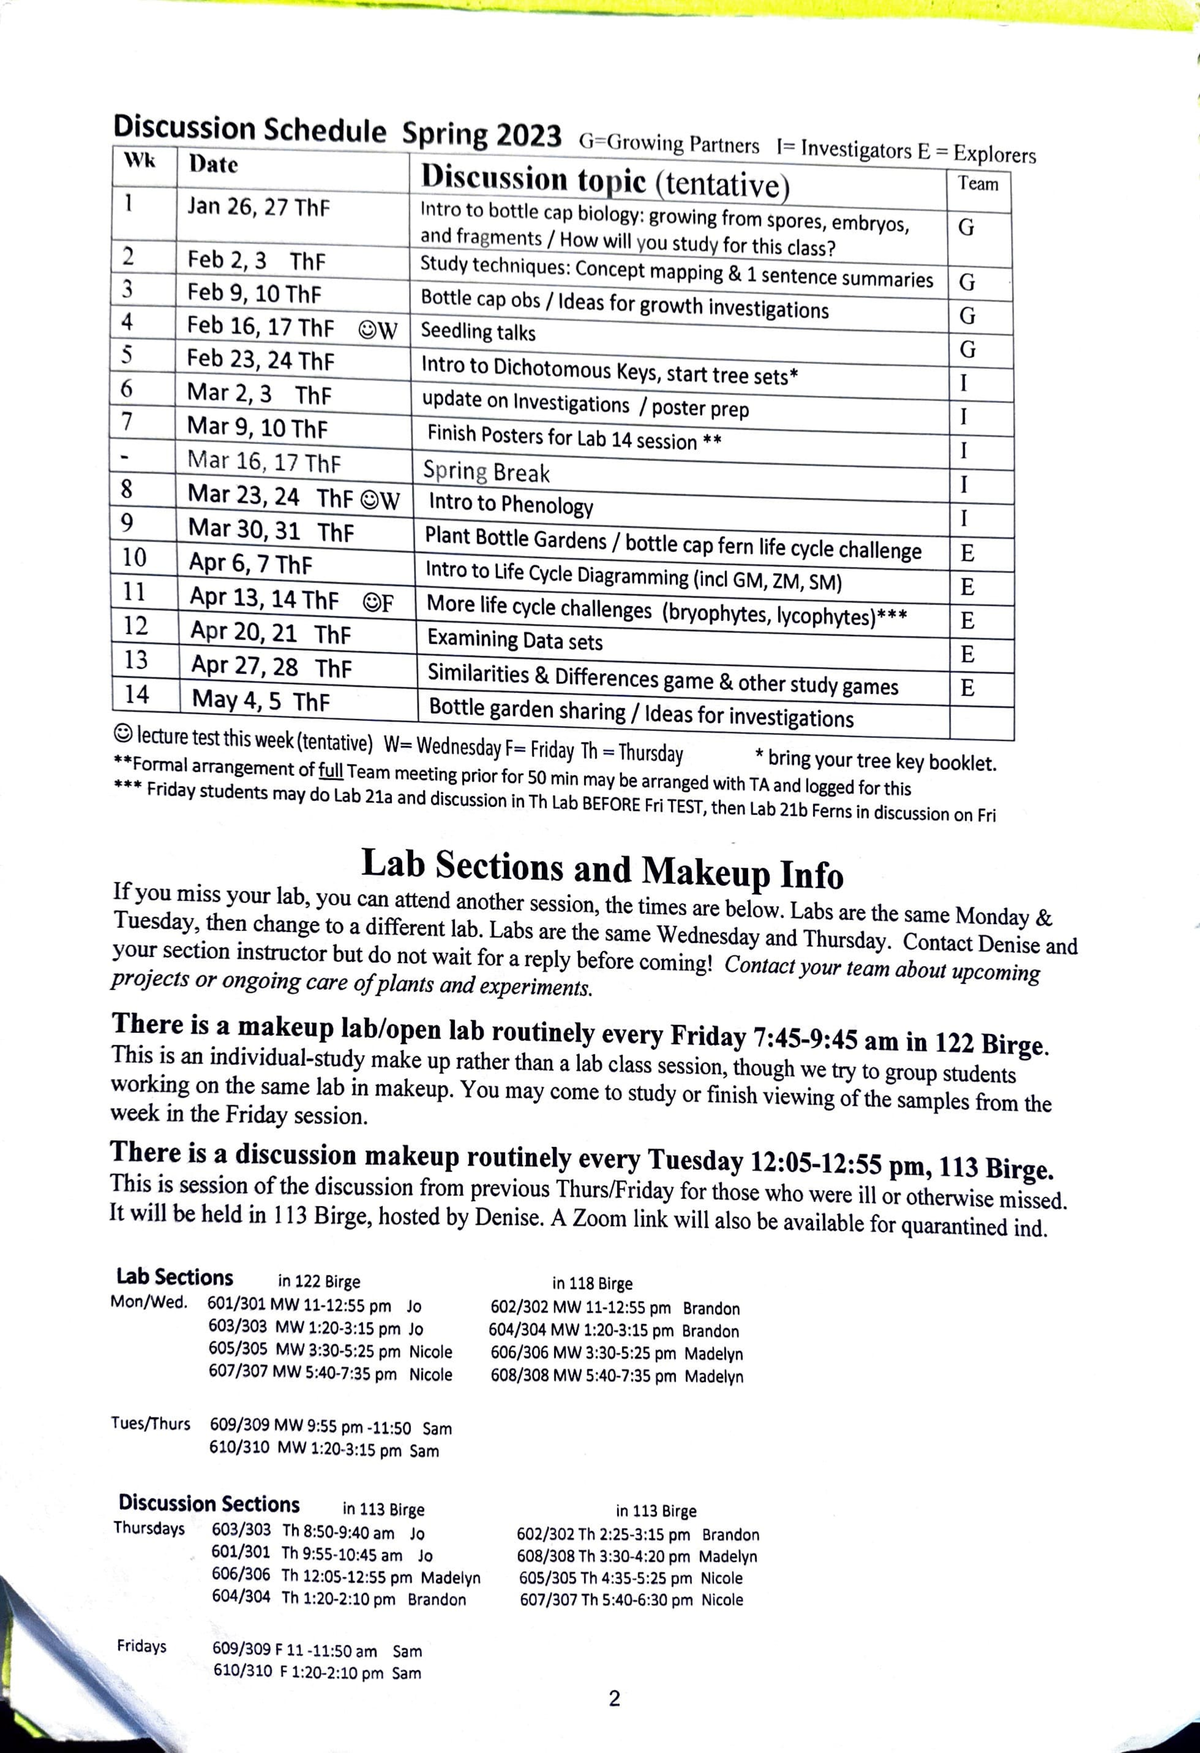 Laboratory Prep Discussion Schedule Spring 2023 G=Growi ng Pa rtners